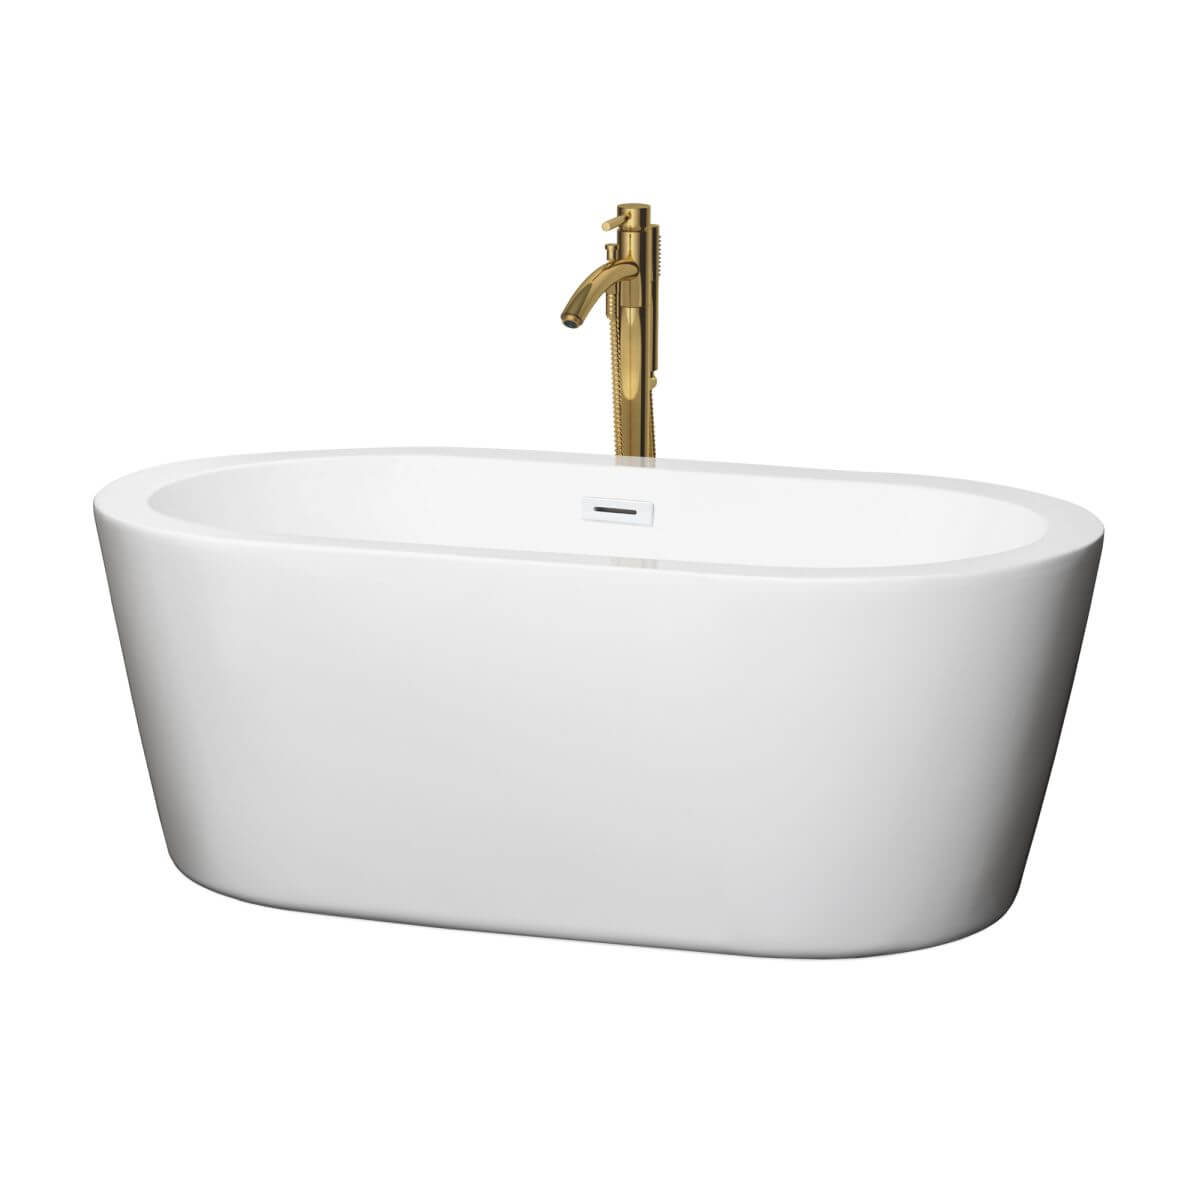 Wyndham Collection Mermaid 60 inch Freestanding Bathtub in White with Shiny White Trim and Floor Mounted Faucet in Brushed Gold - WCOBT100360SWATPGD